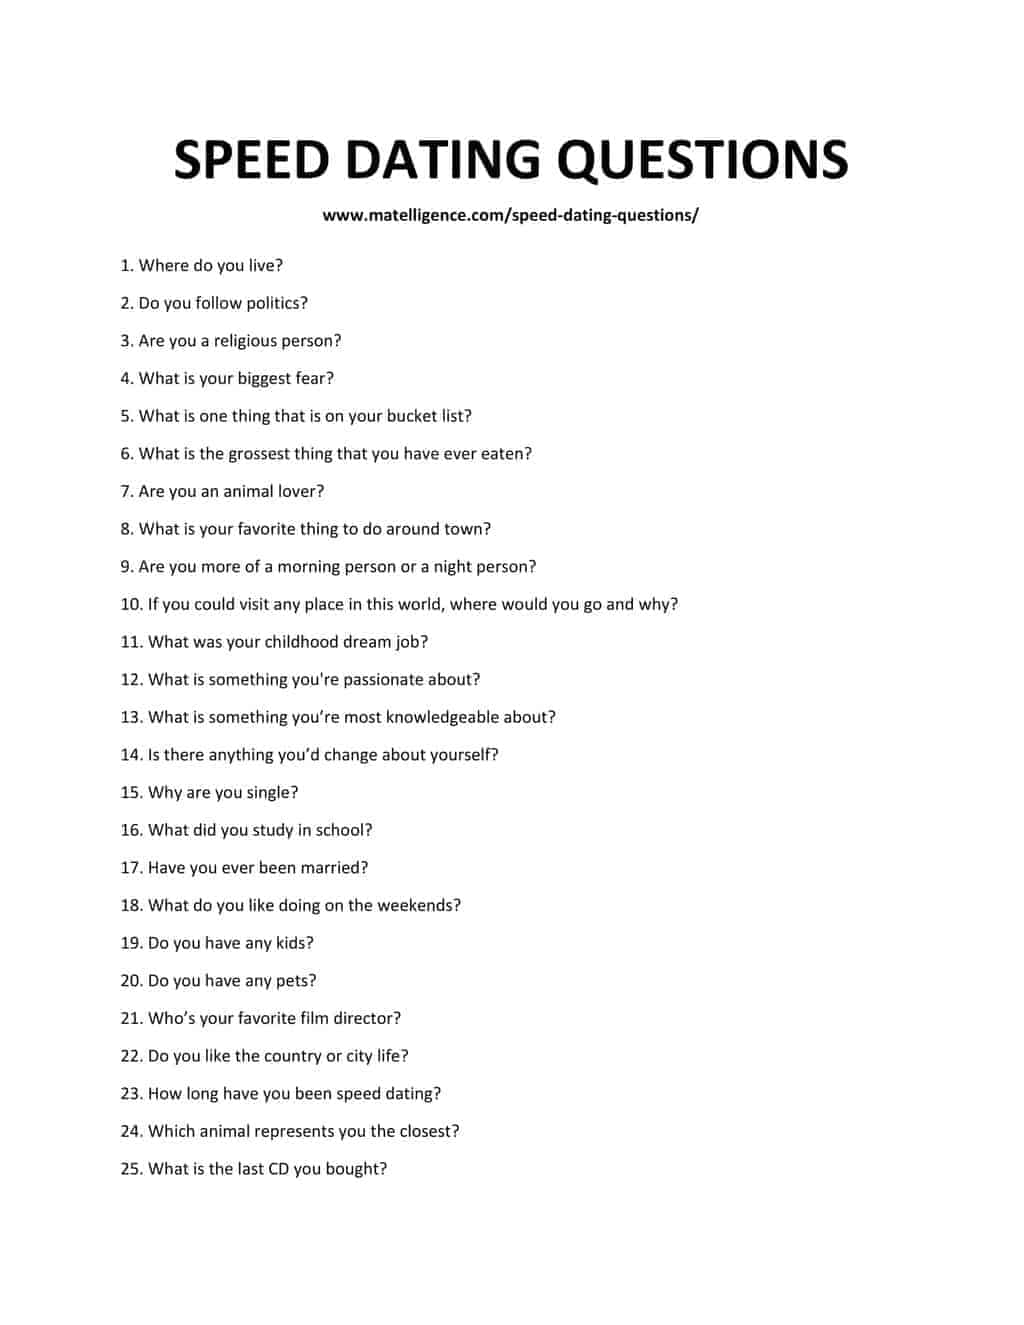 SPEED_DATING_QUESTIONS-1[1]